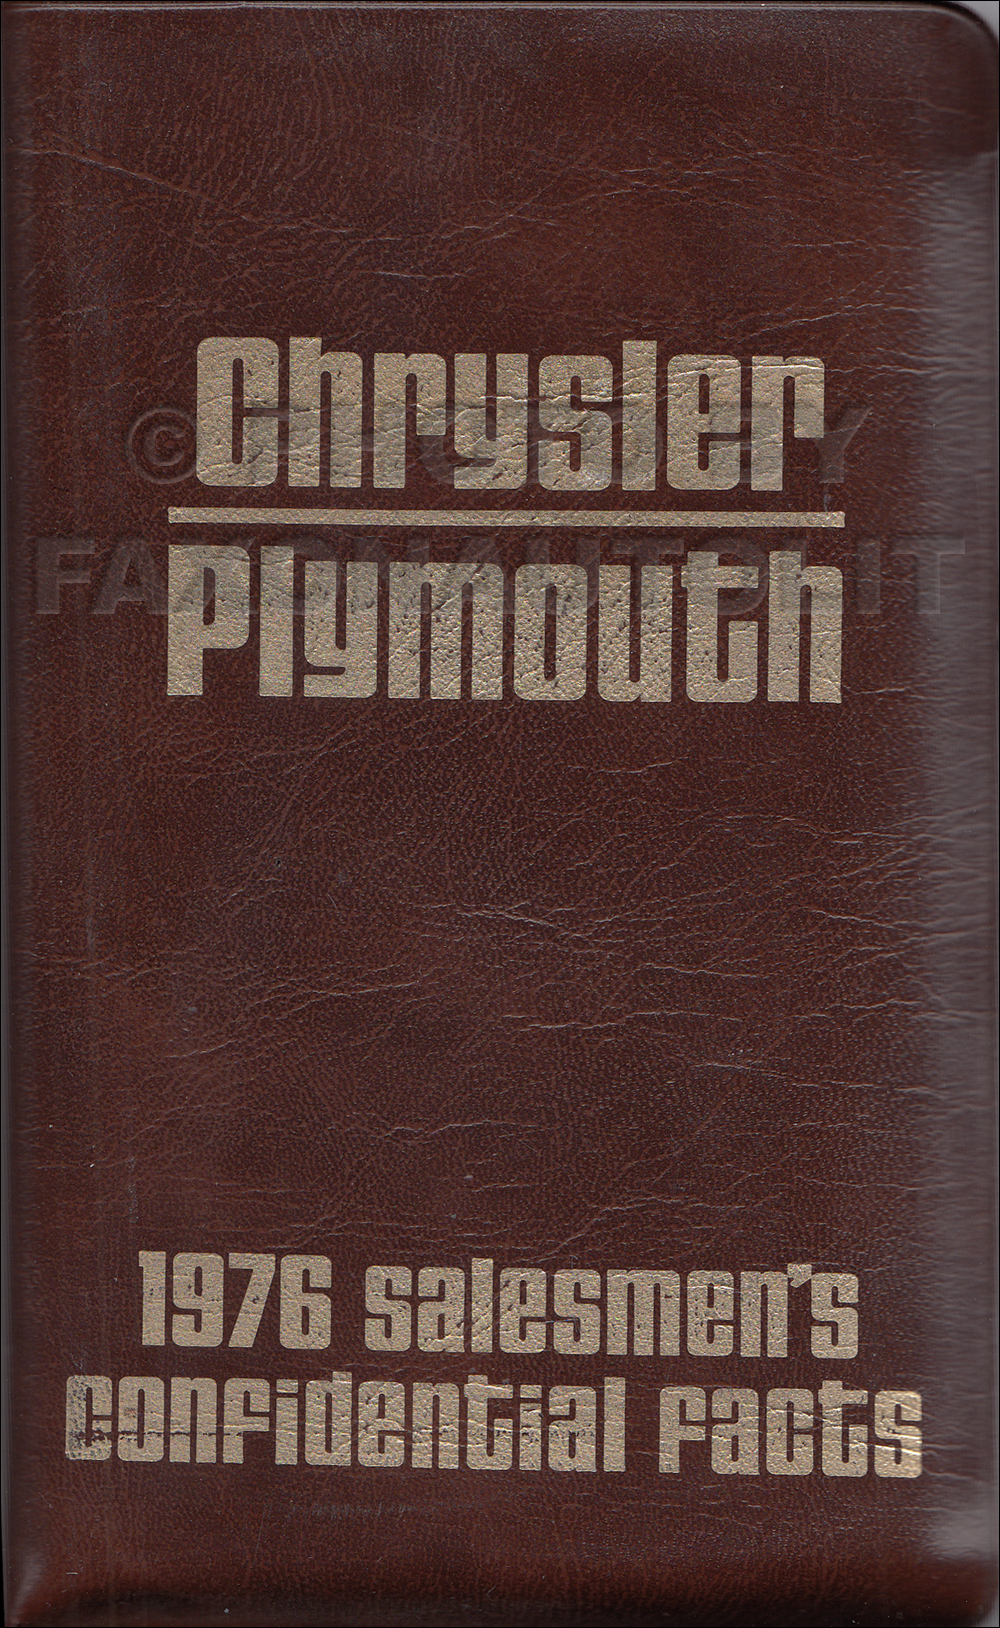 1976 Chrysler Plymouth Pocket Size Salesmen's Confidential Facts Guide Original